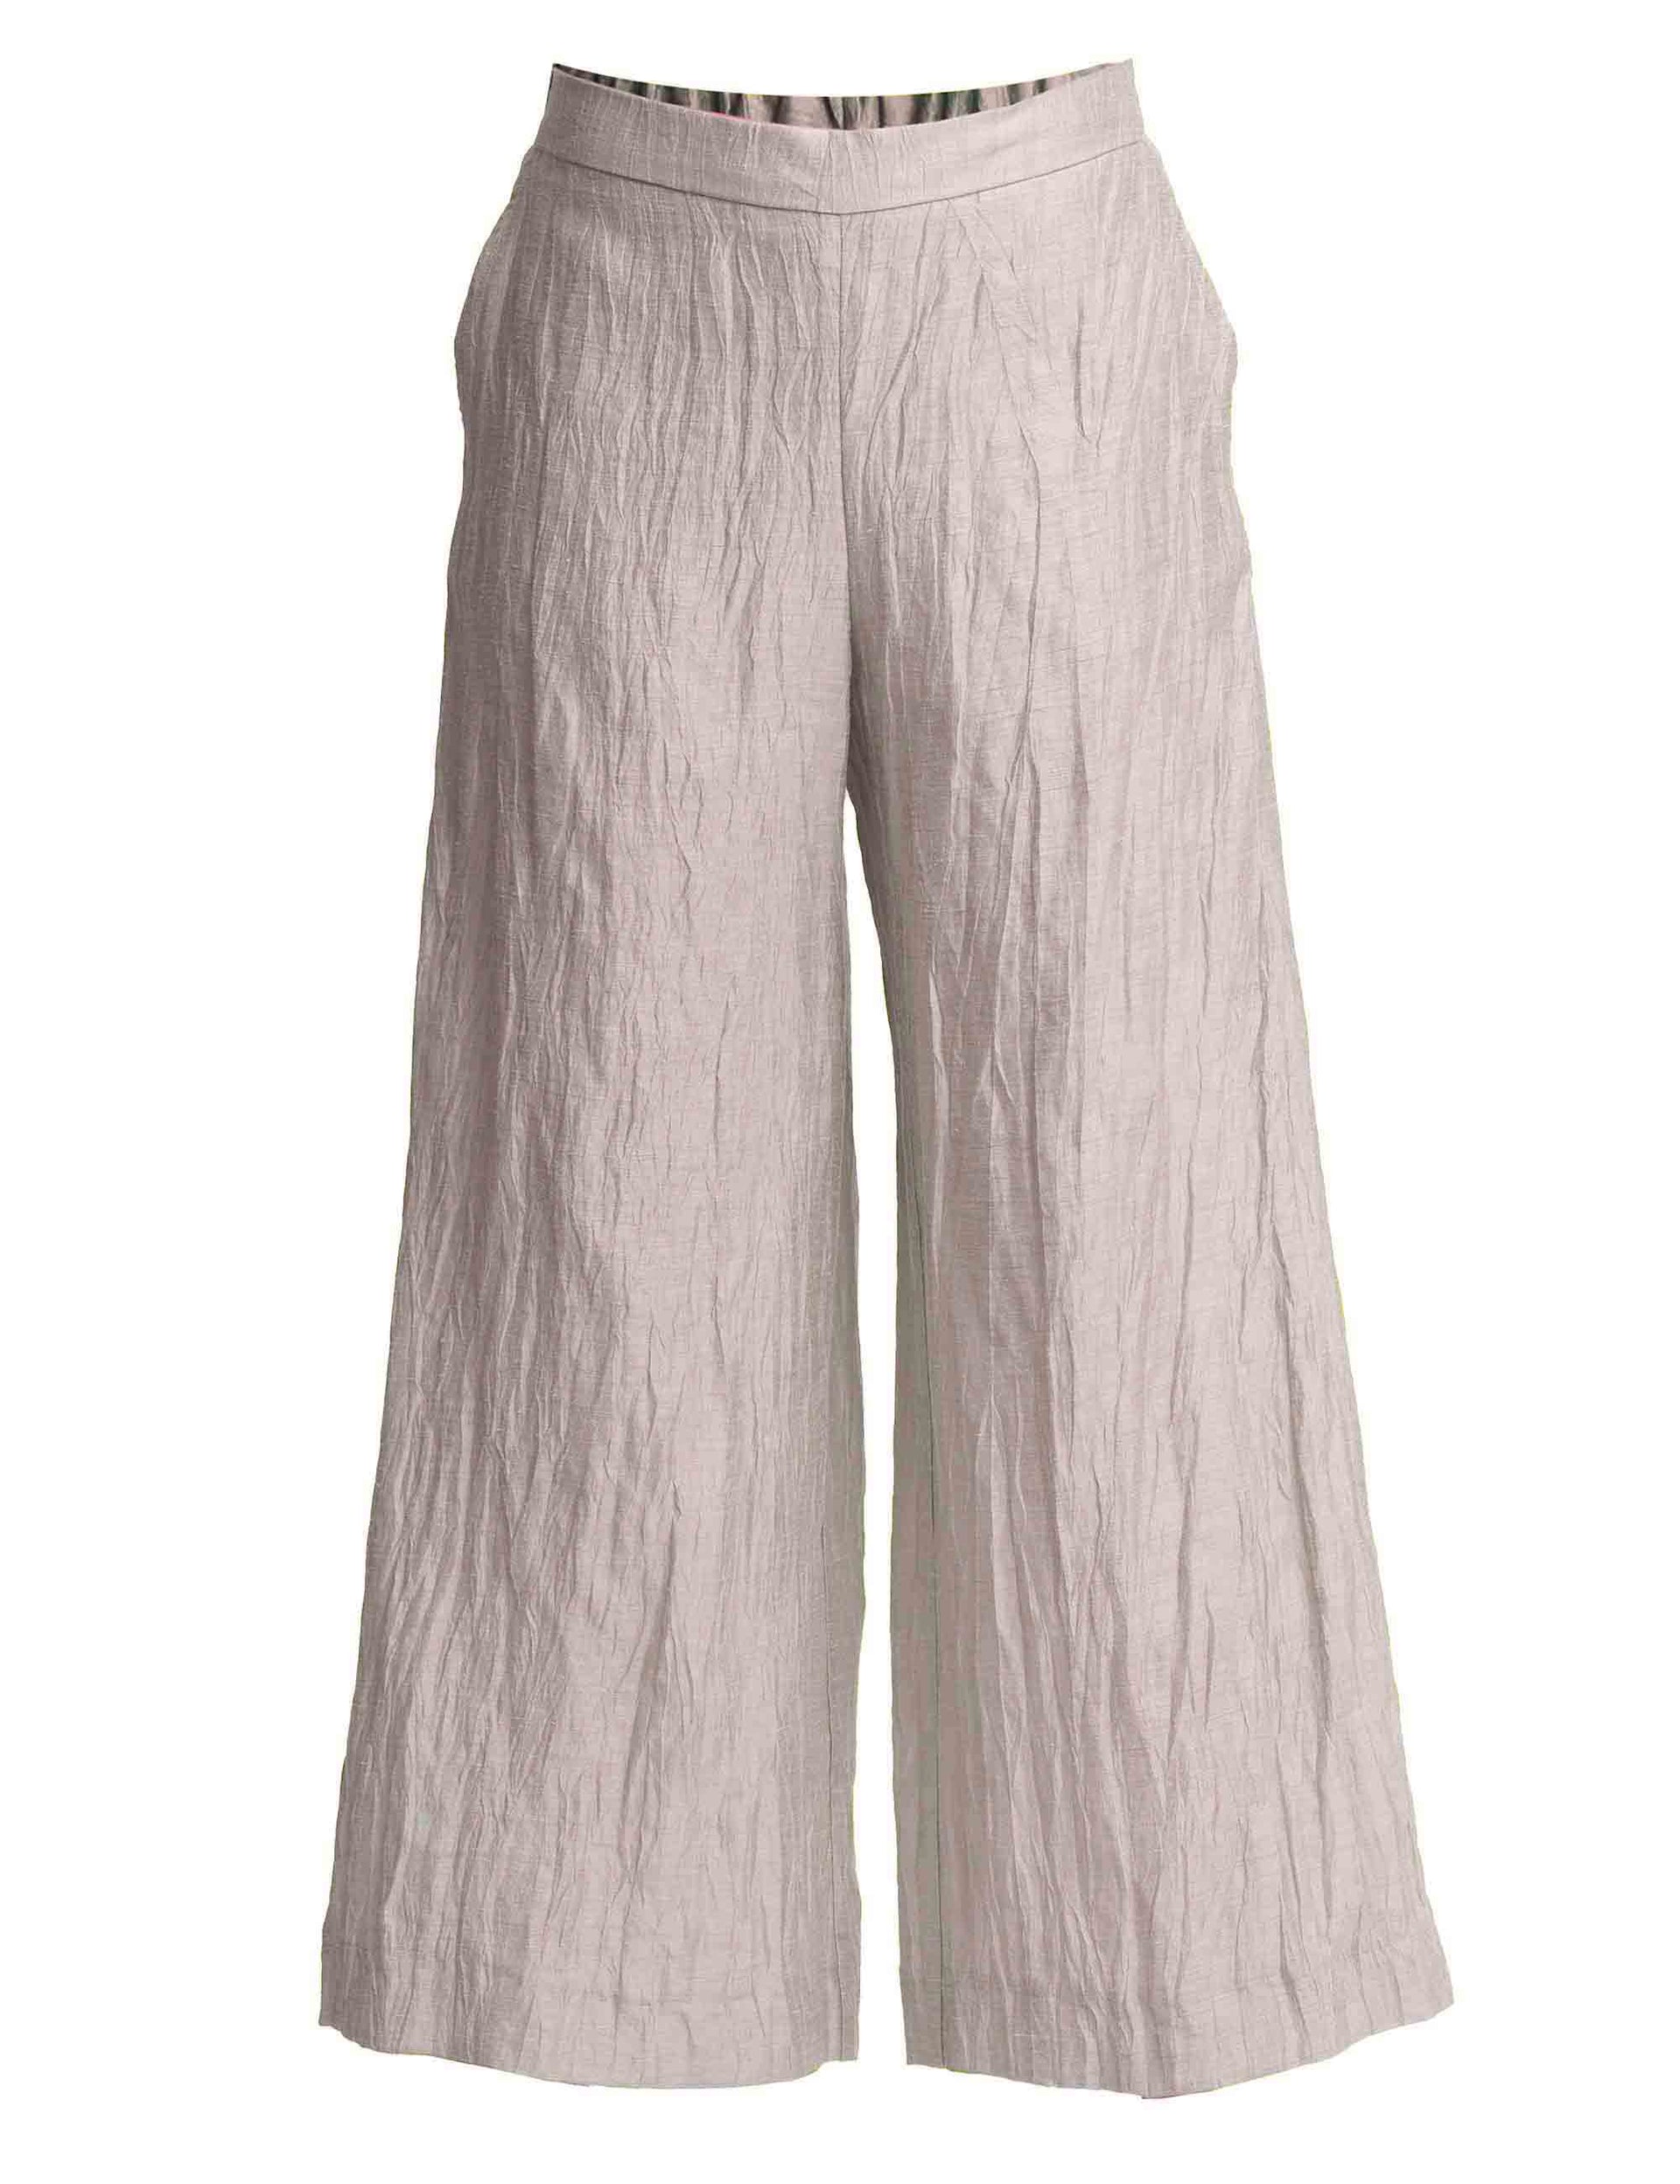 Froissé women's trousers in white linen with wide leg